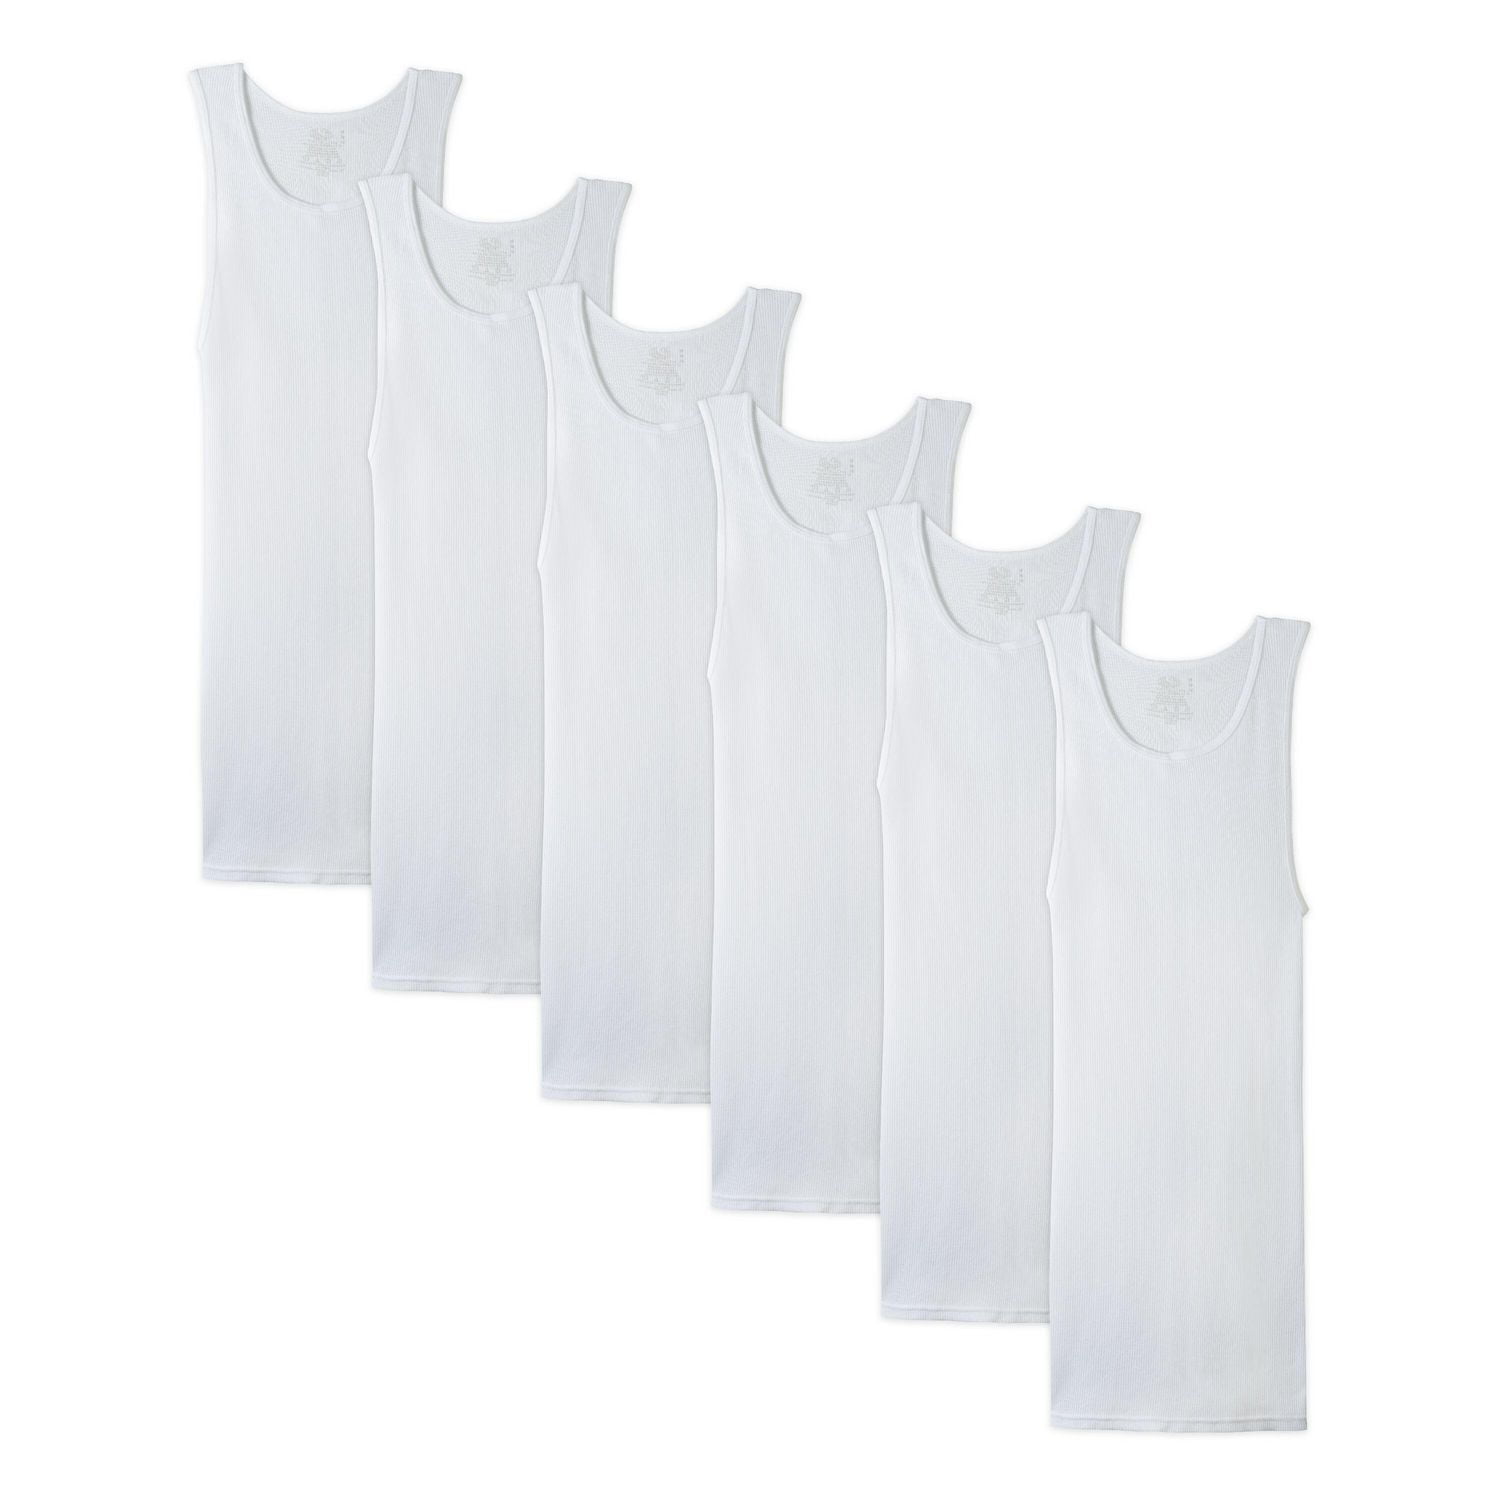 Fruit of the Loom Men's White A-Shirts, 6-Pack, Sizes S-XL